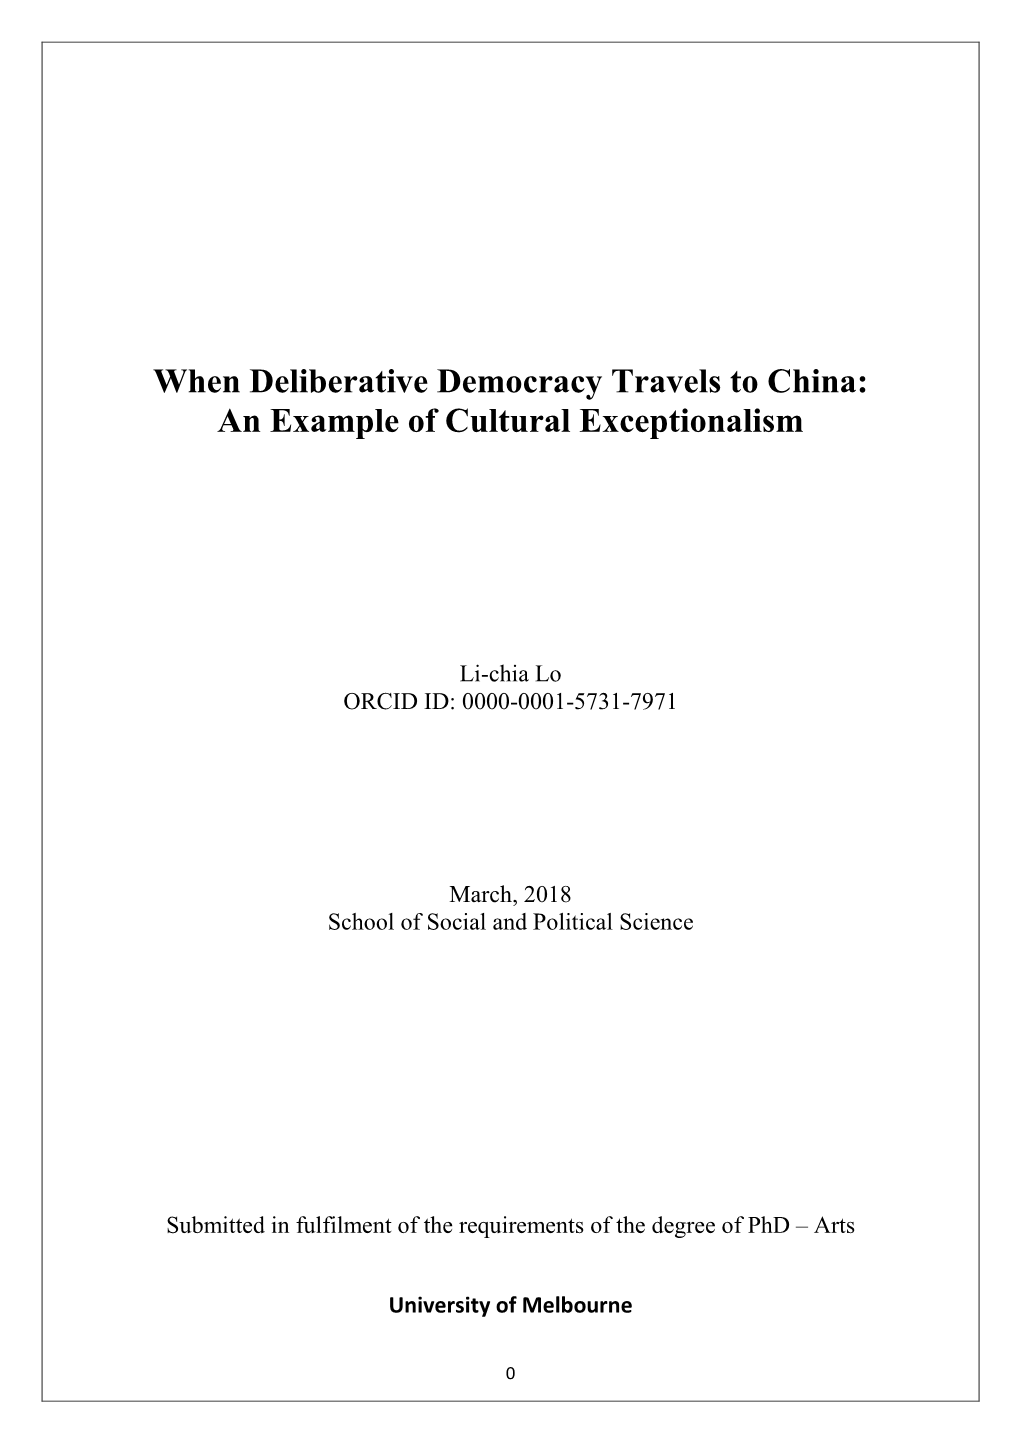 When Deliberative Democracy Travels to China: an Example of Cultural Exceptionalism